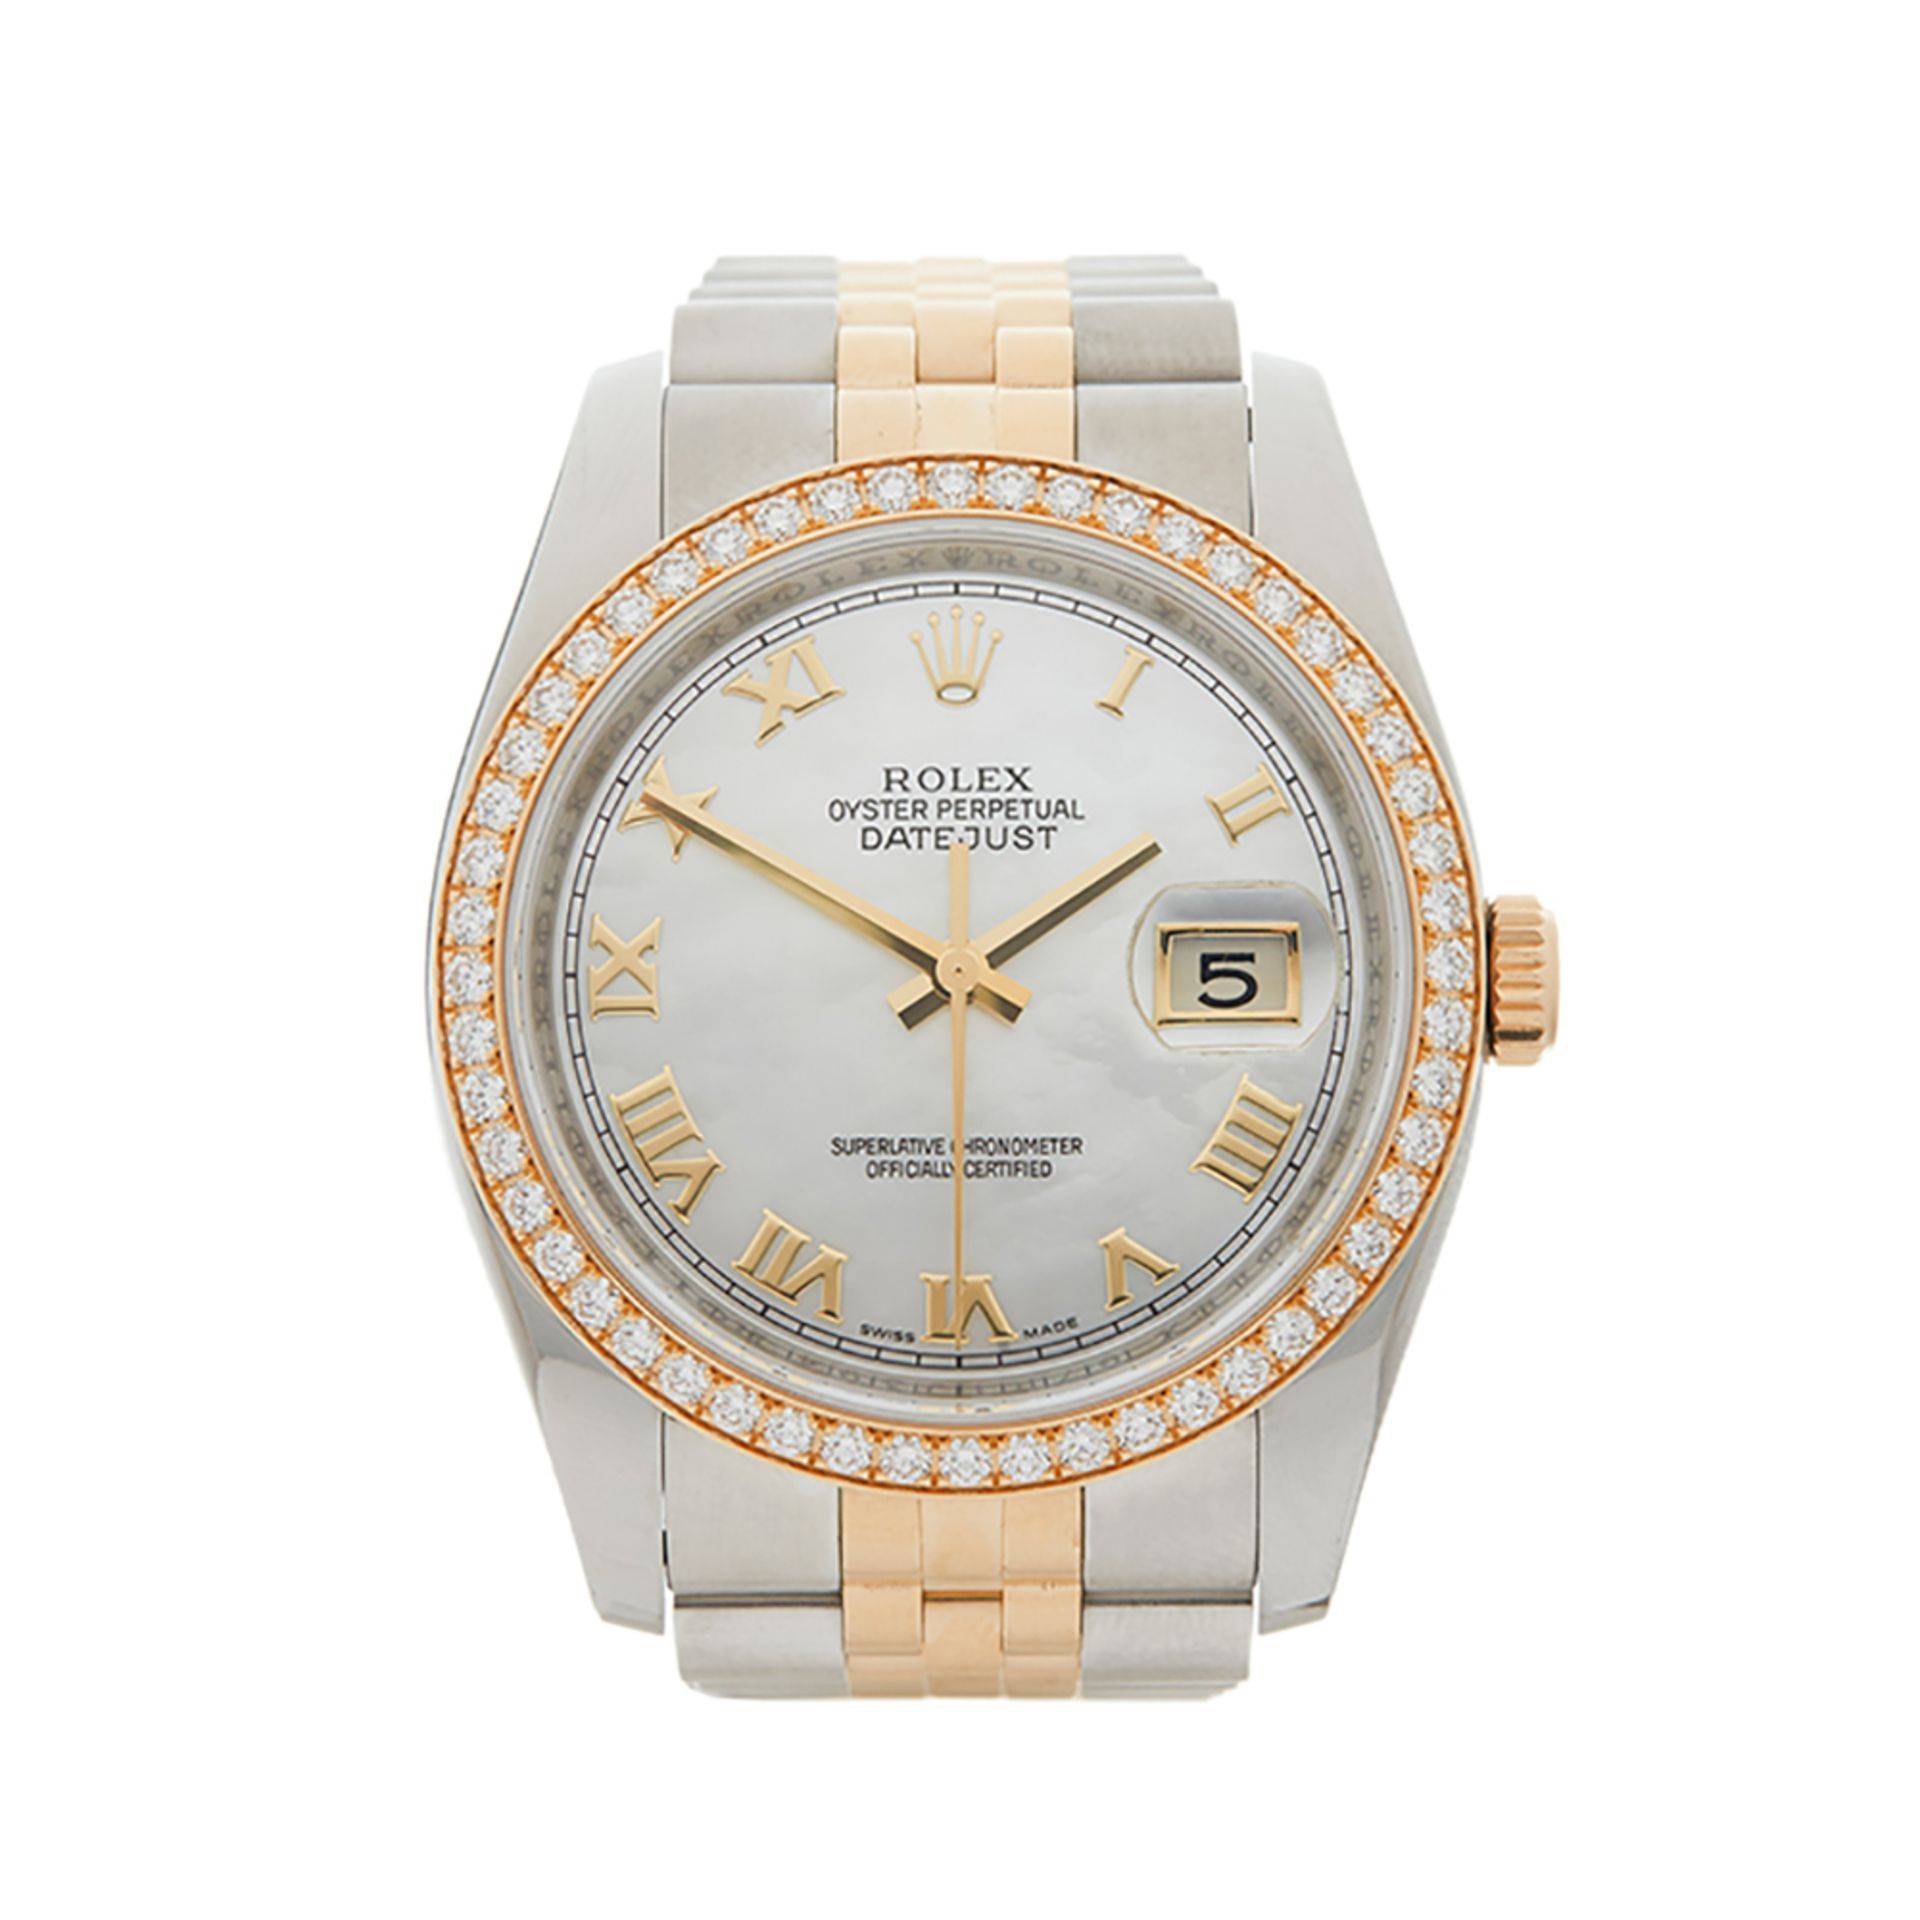 2011 Rolex DateJust 36 Mother of Pearl Diamond 18k Stainless Steel & Yellow Gold - 116243 - Image 5 of 7